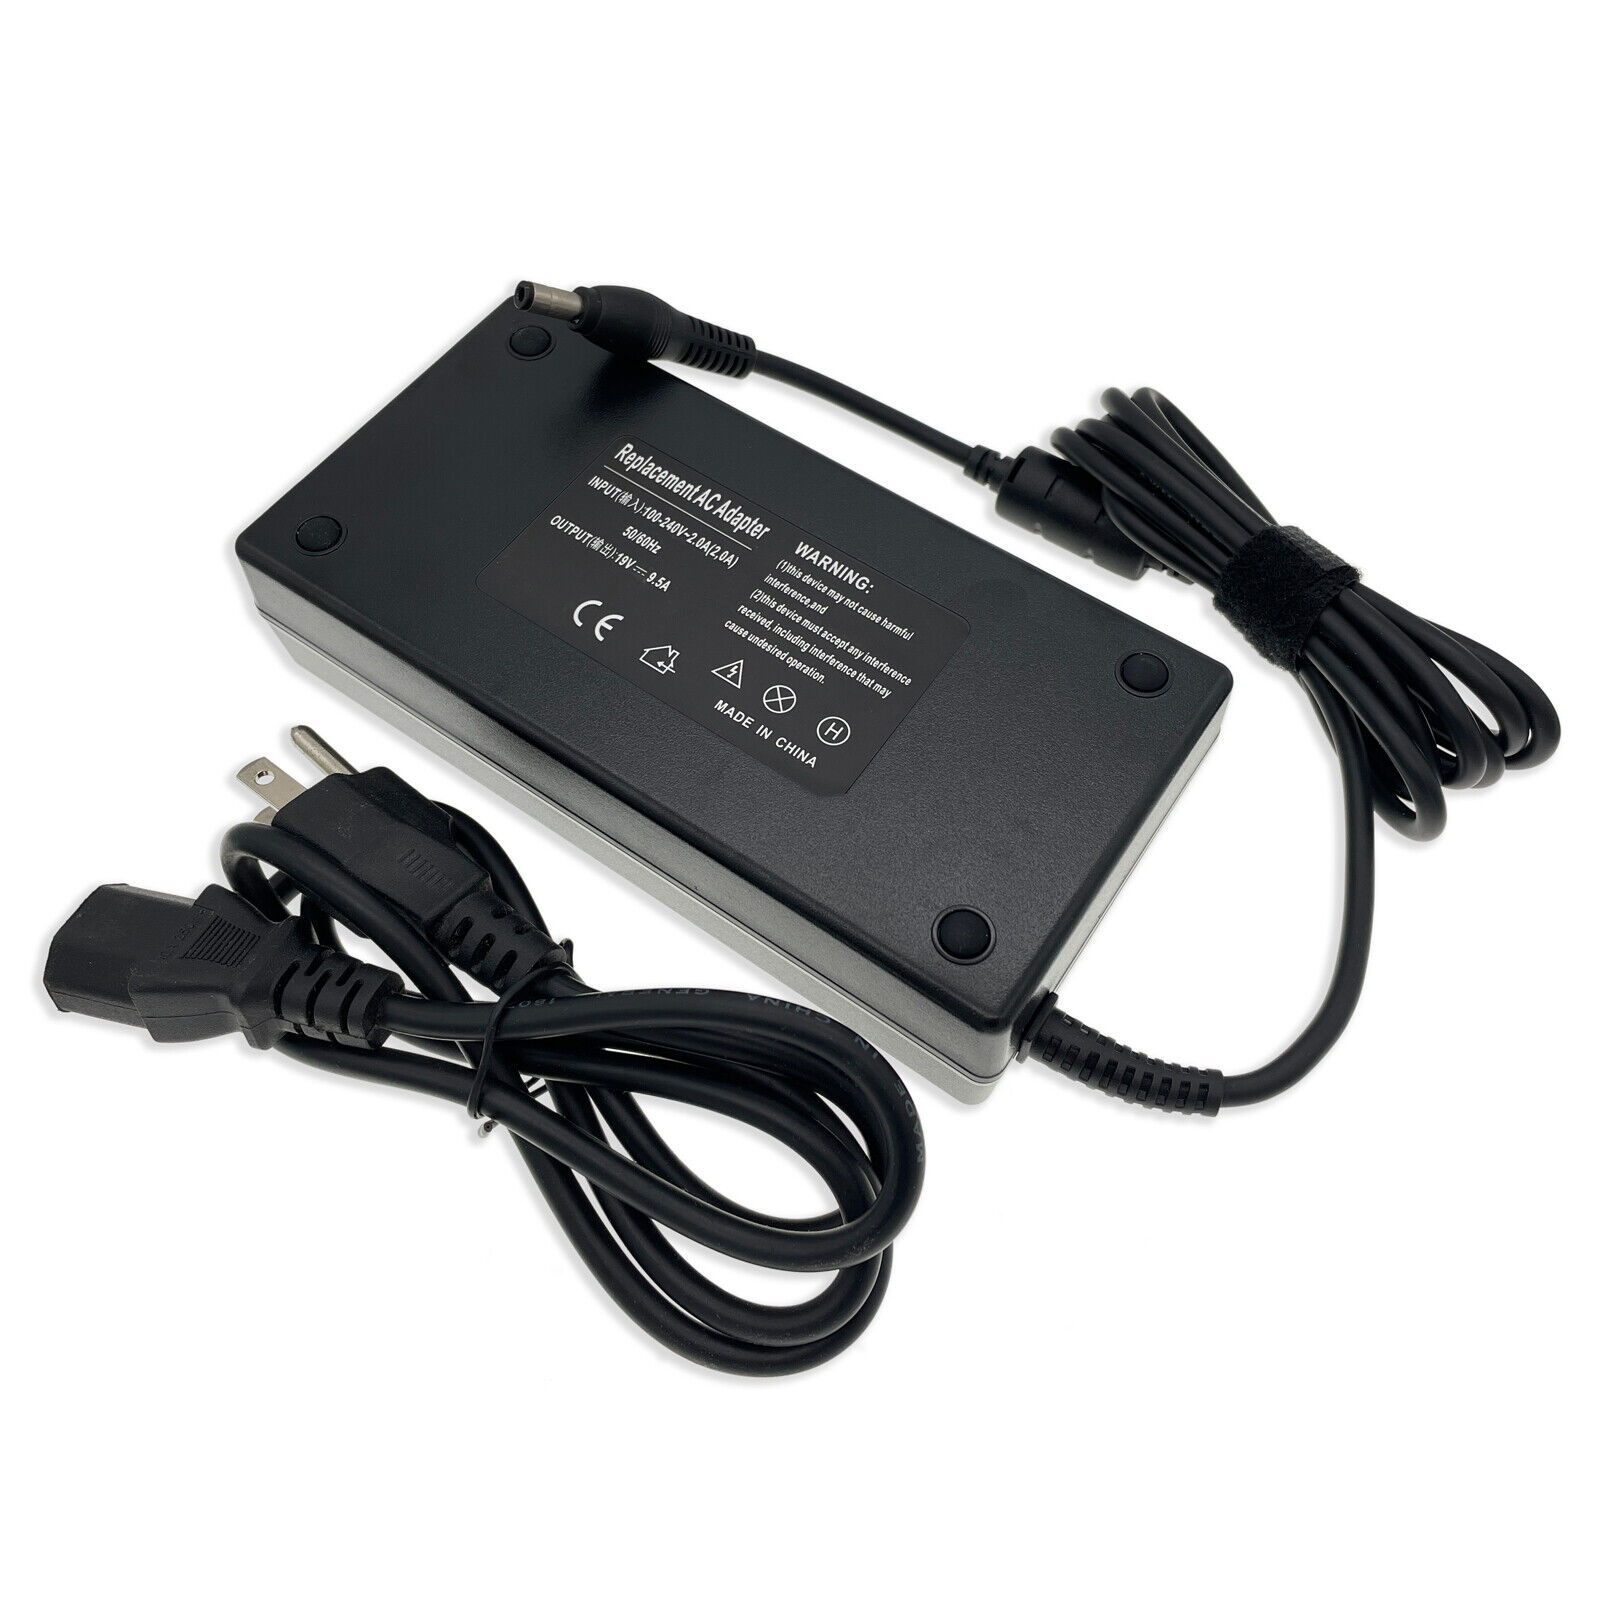 New 180W AC Power Adapter Charger Cord For ASUS ROG G20AJ-US006S G20AJ-US029S